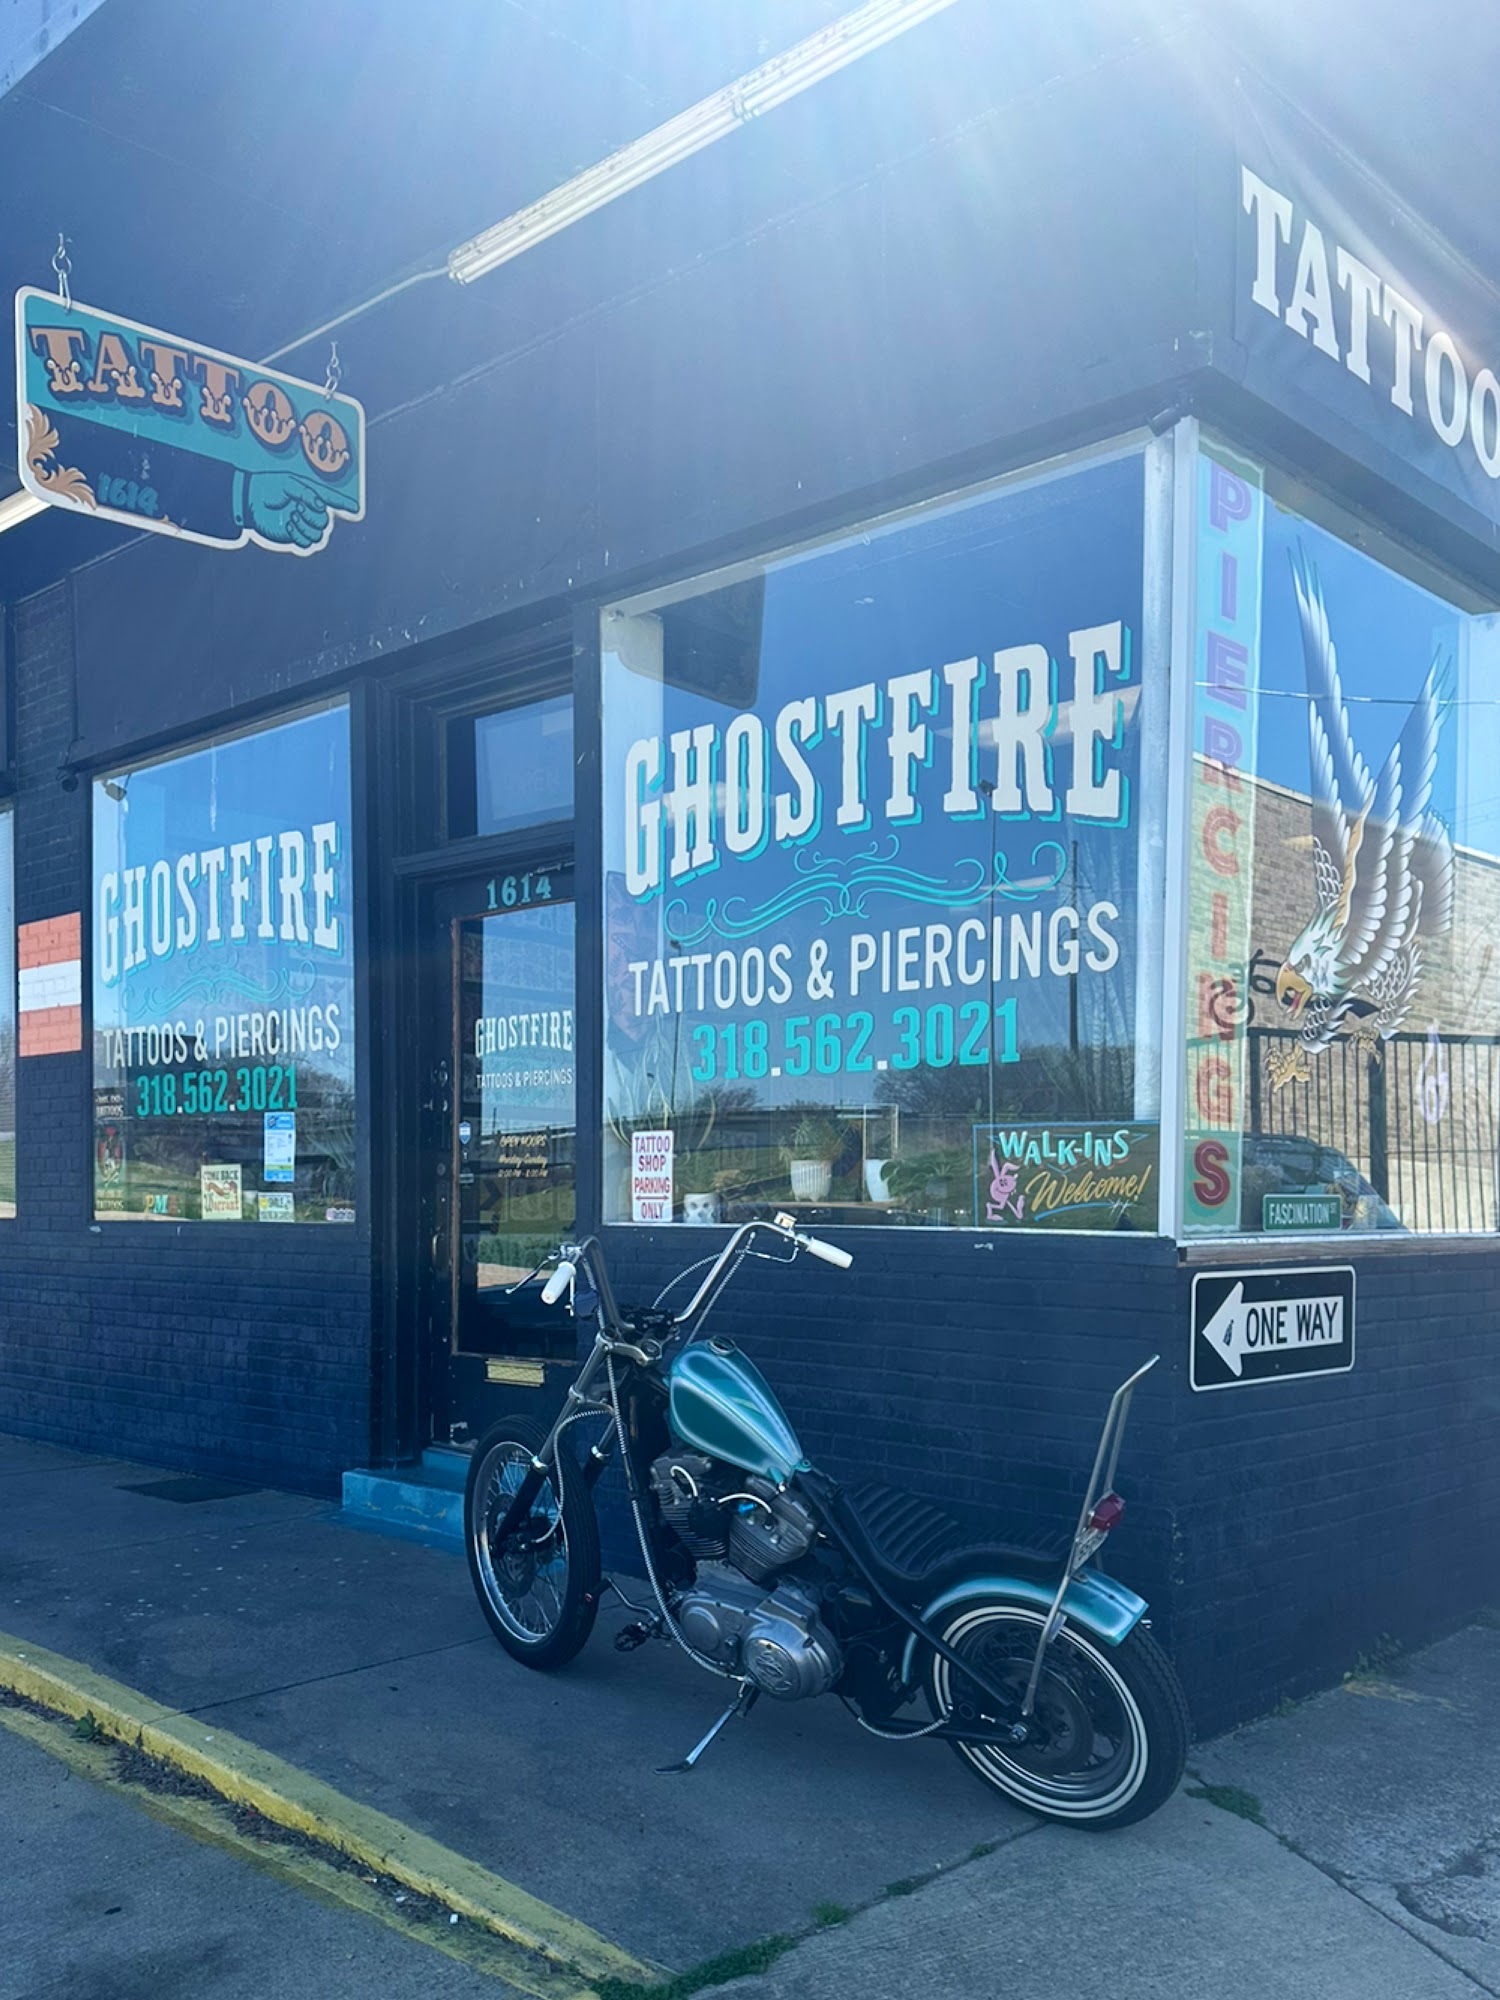 Ghostfire Tattoo and Piercing